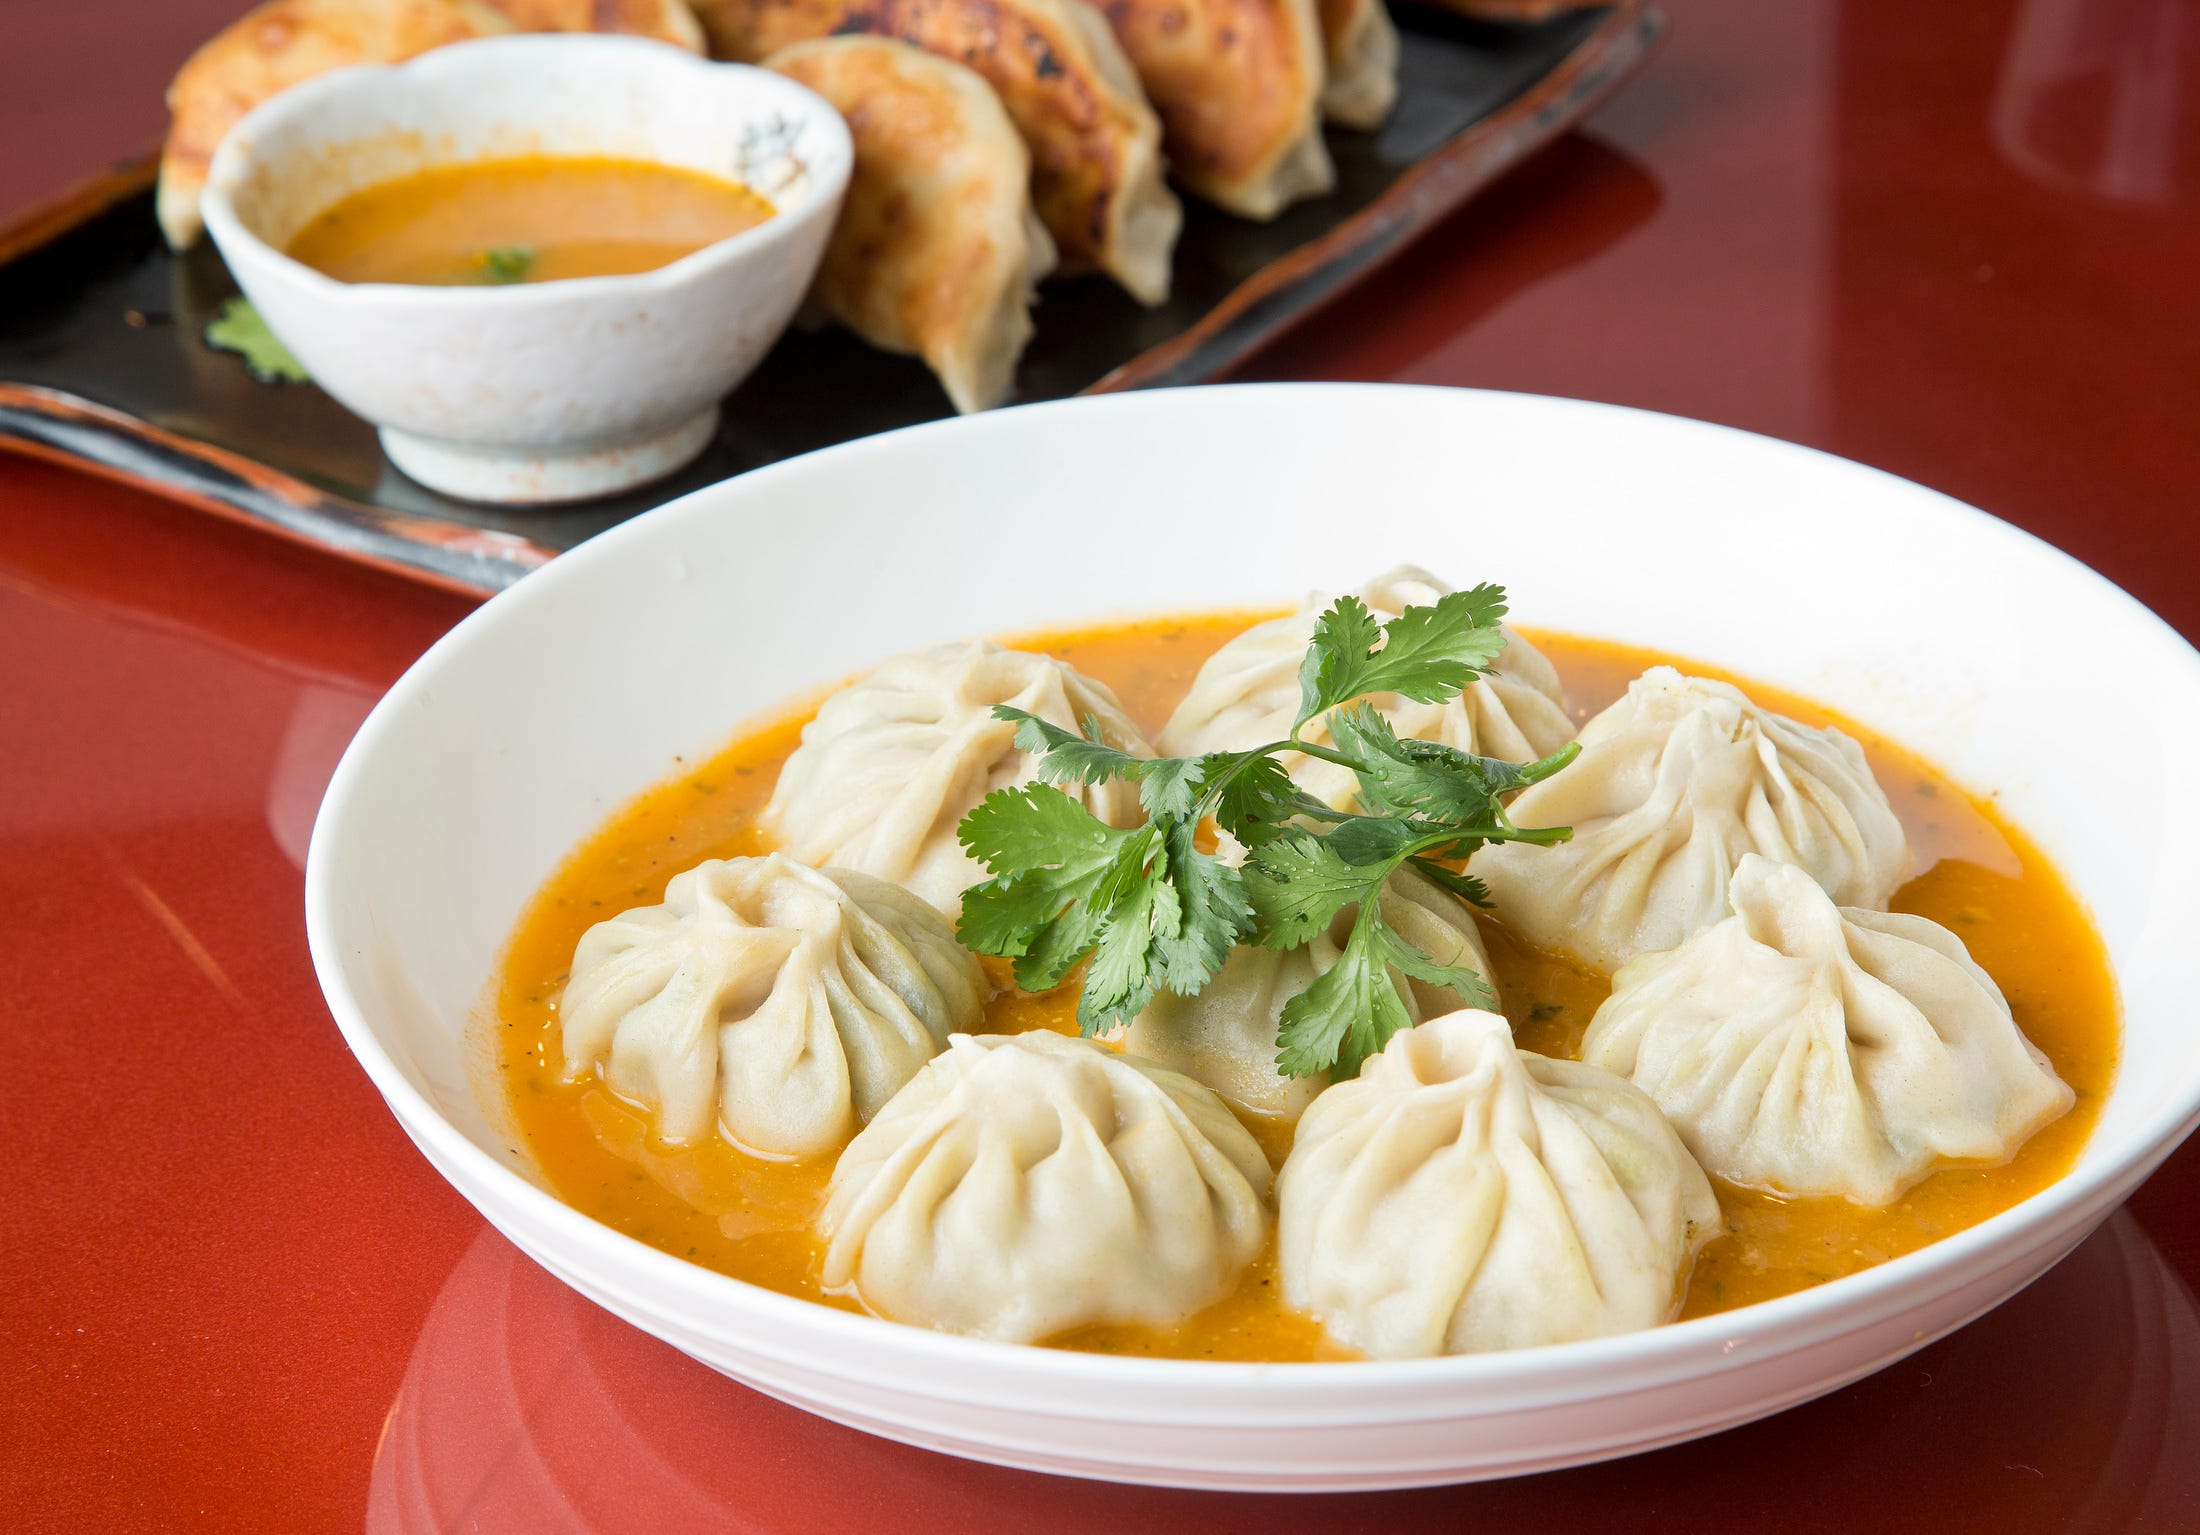 Momo Ghar Dishes Up Momos More With First Standalone Restaurant